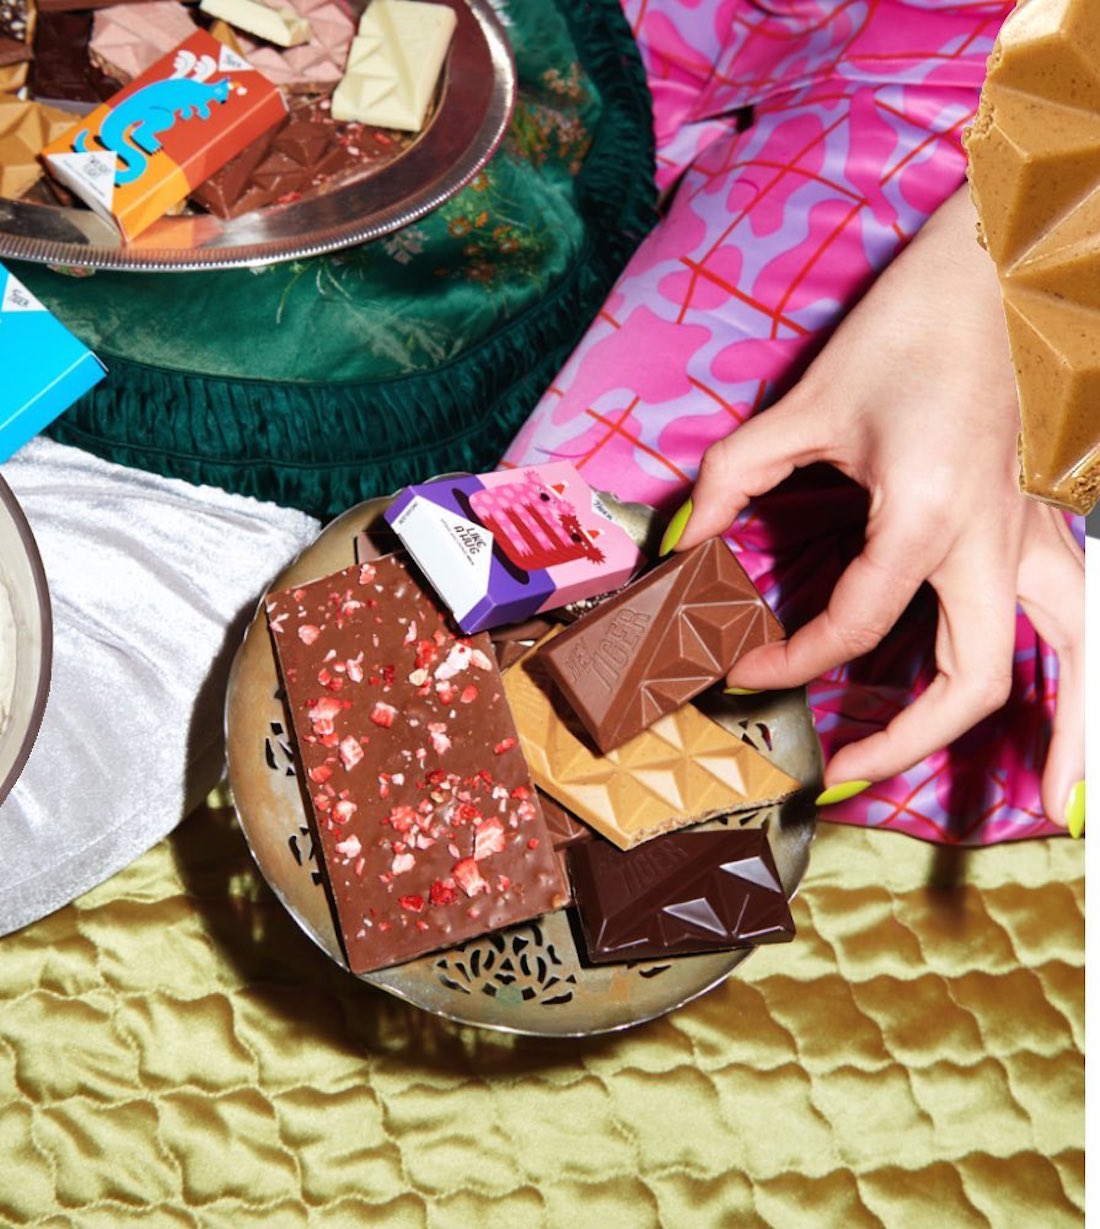 A hand reaches for a full plate of delicious Hey Tiger Co chocolate.